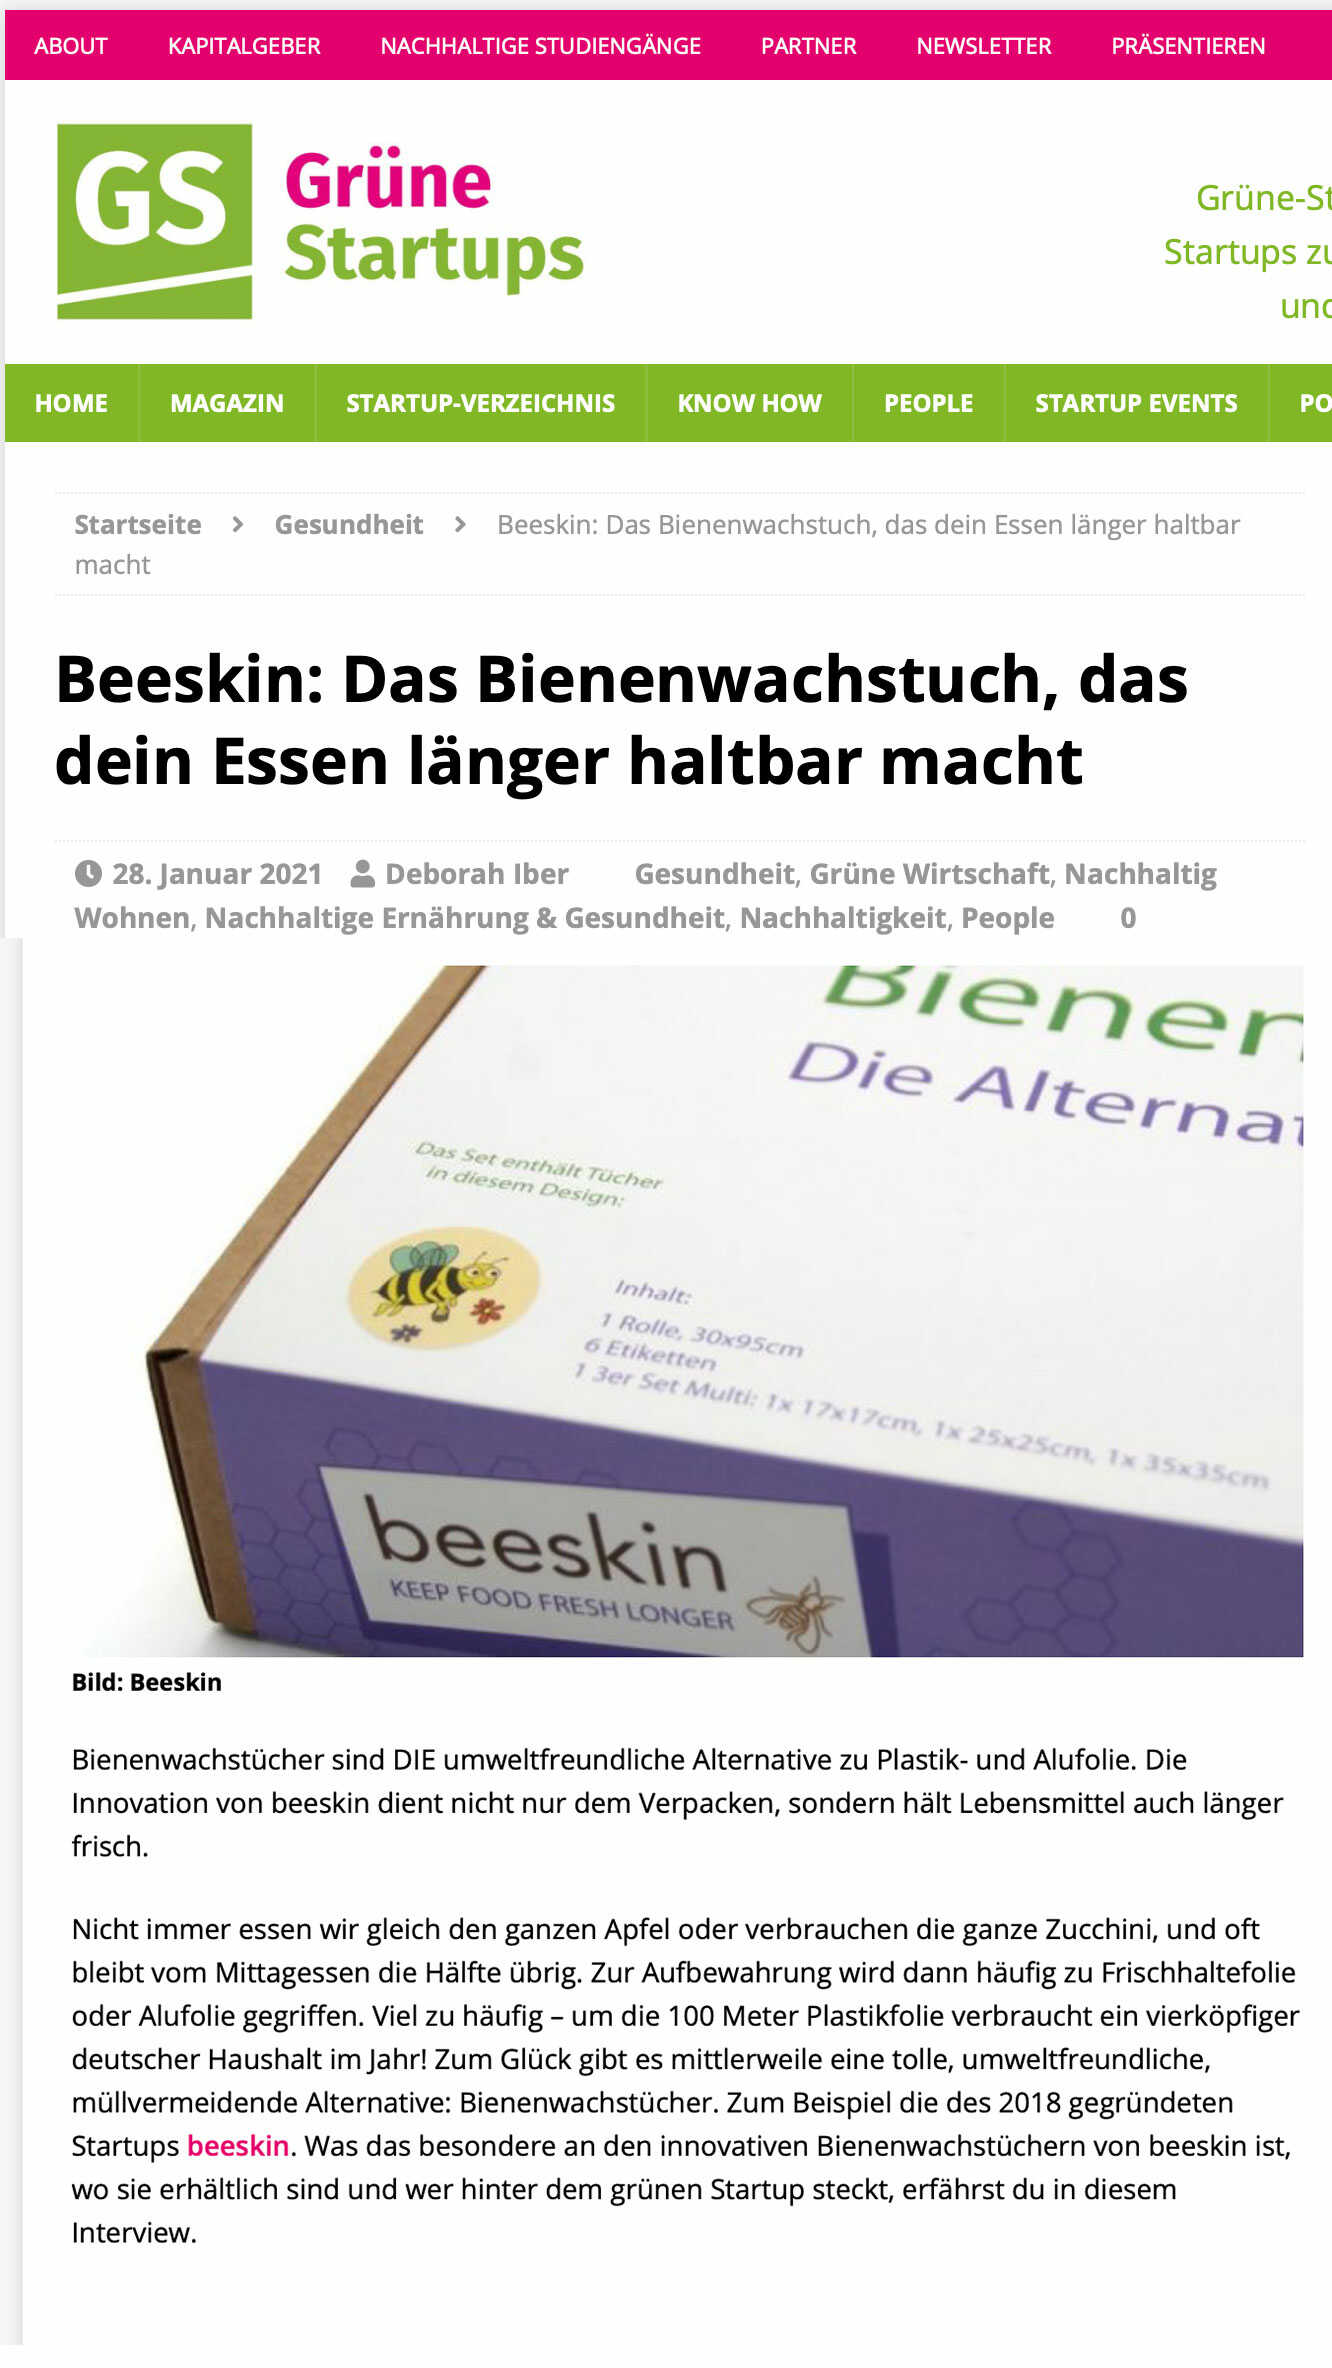 Grüne startups showing the giftset of beeskin beeswax wraps to keep food fresh longer